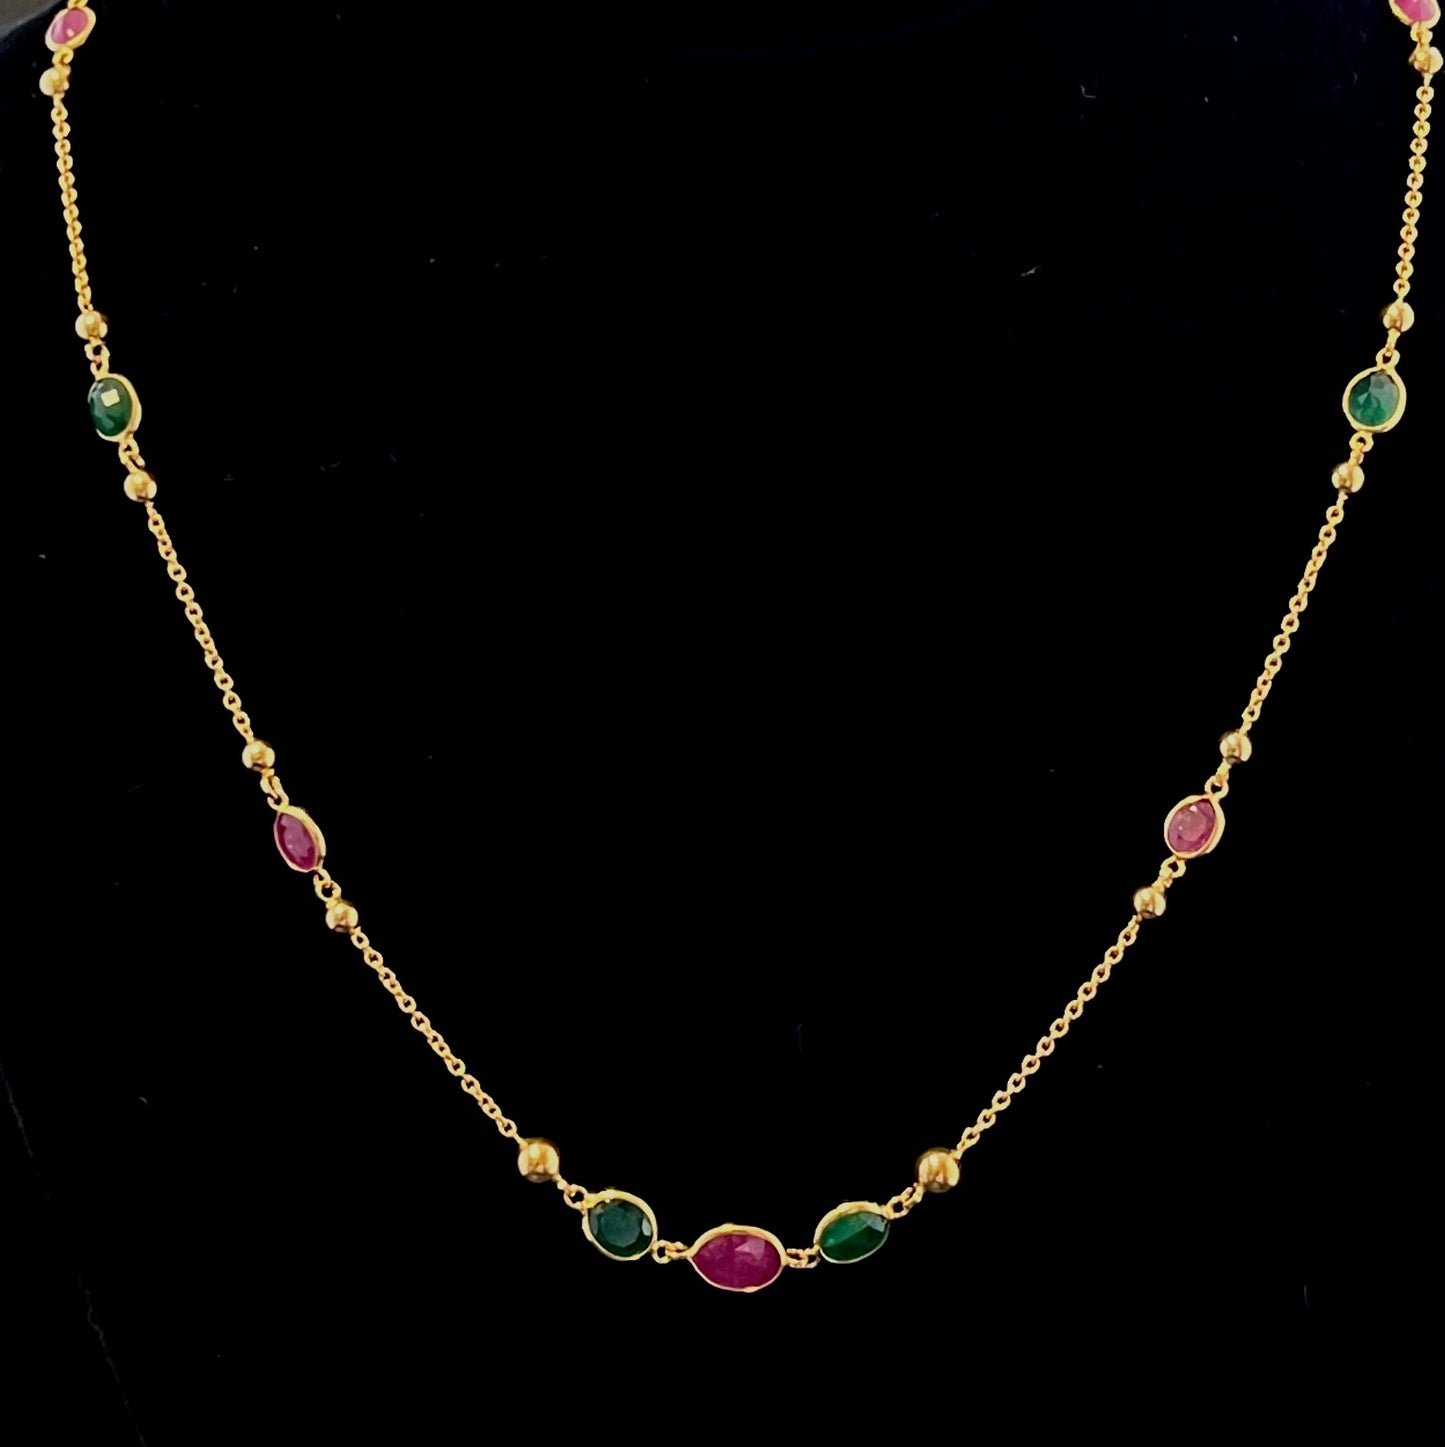 Oval-cut Gemstones set in Gold Chain